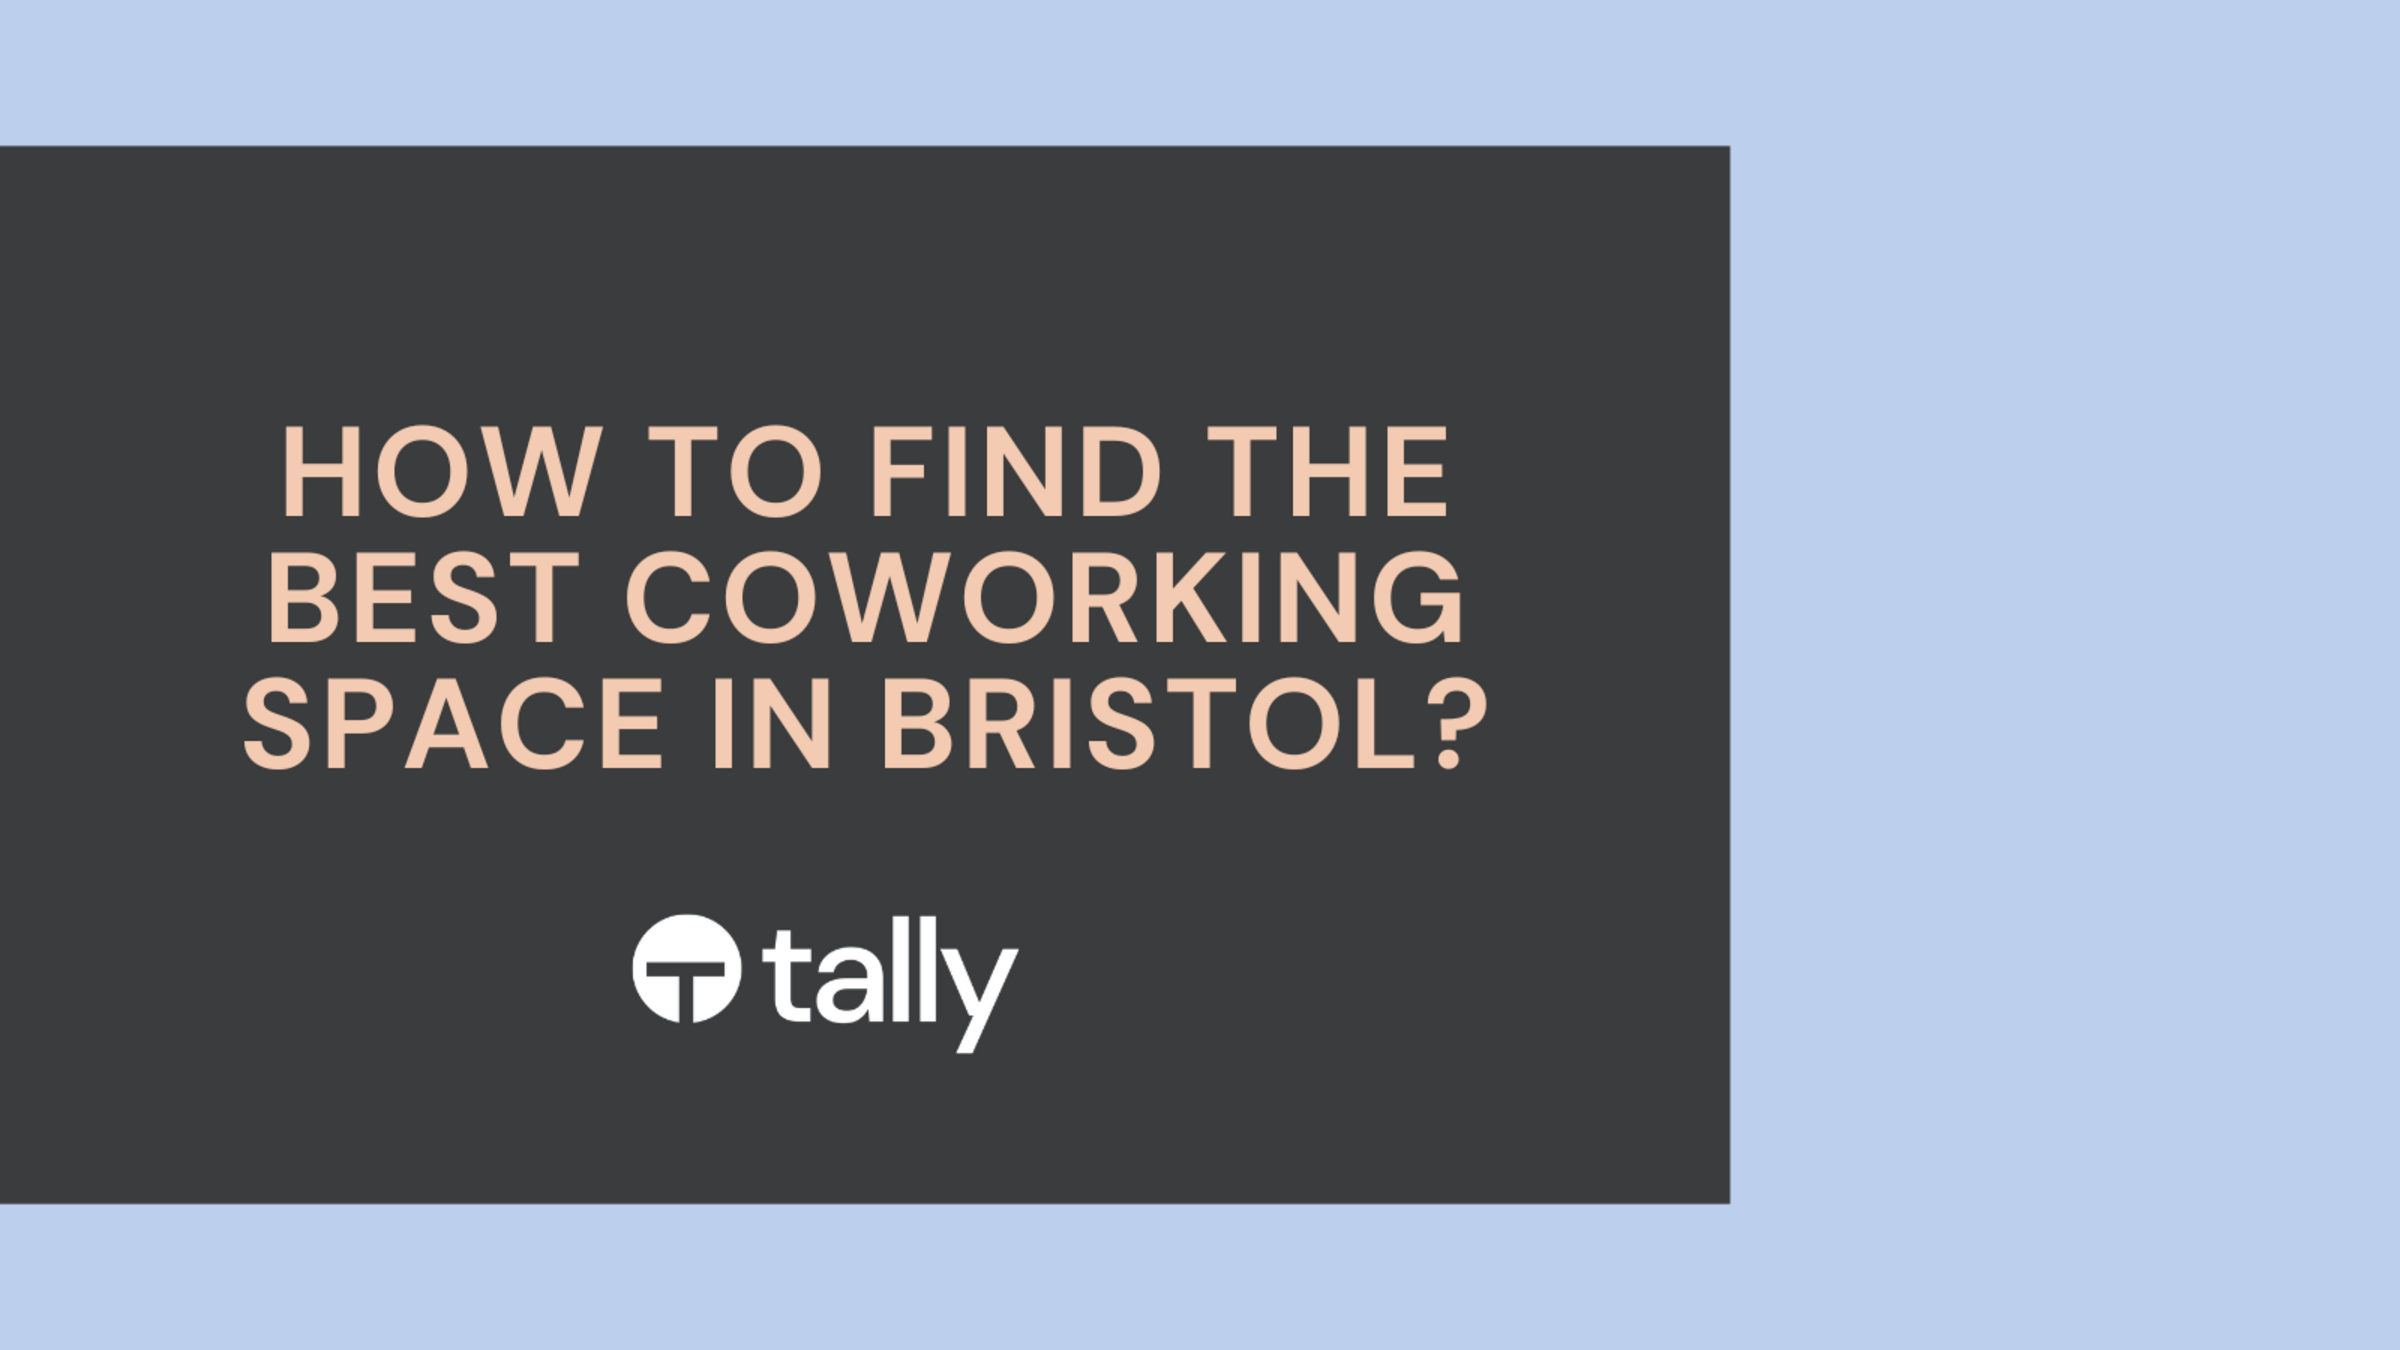 How to find the best coworking space in Bristol